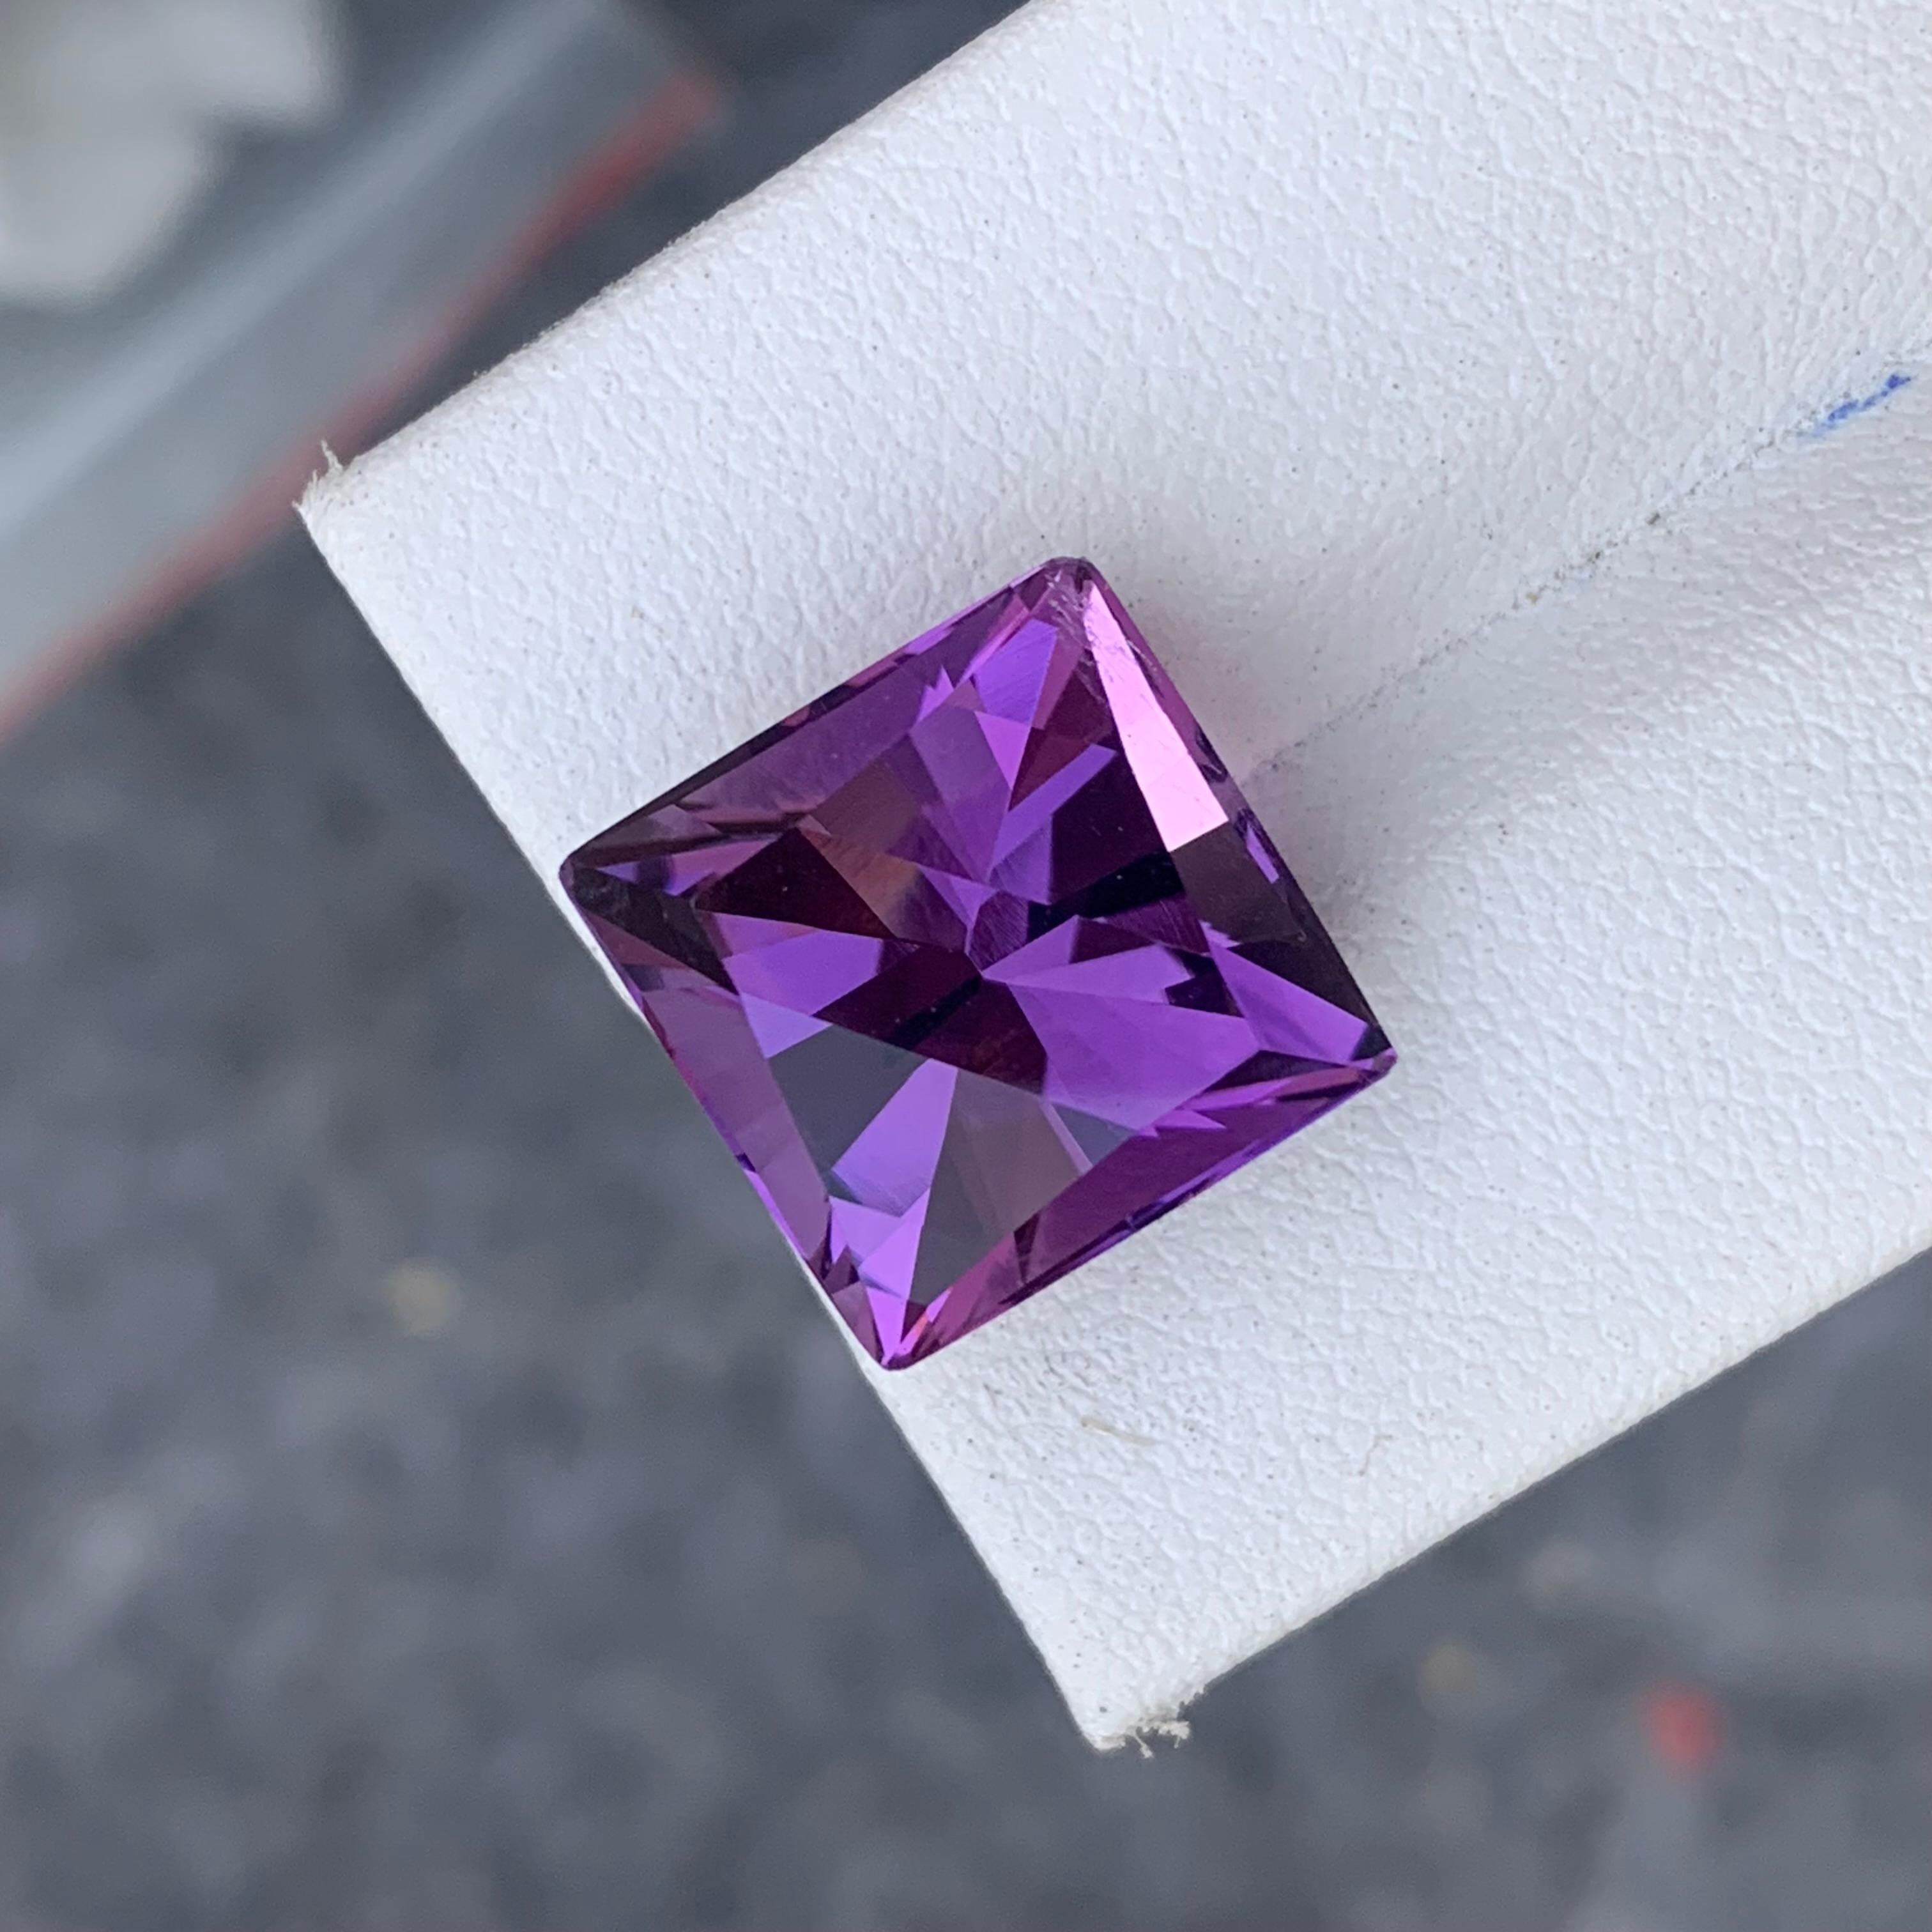 10.40 Carat Natural Loose Bar Cut Amethyst Gemstone From Brazil For Sale 1